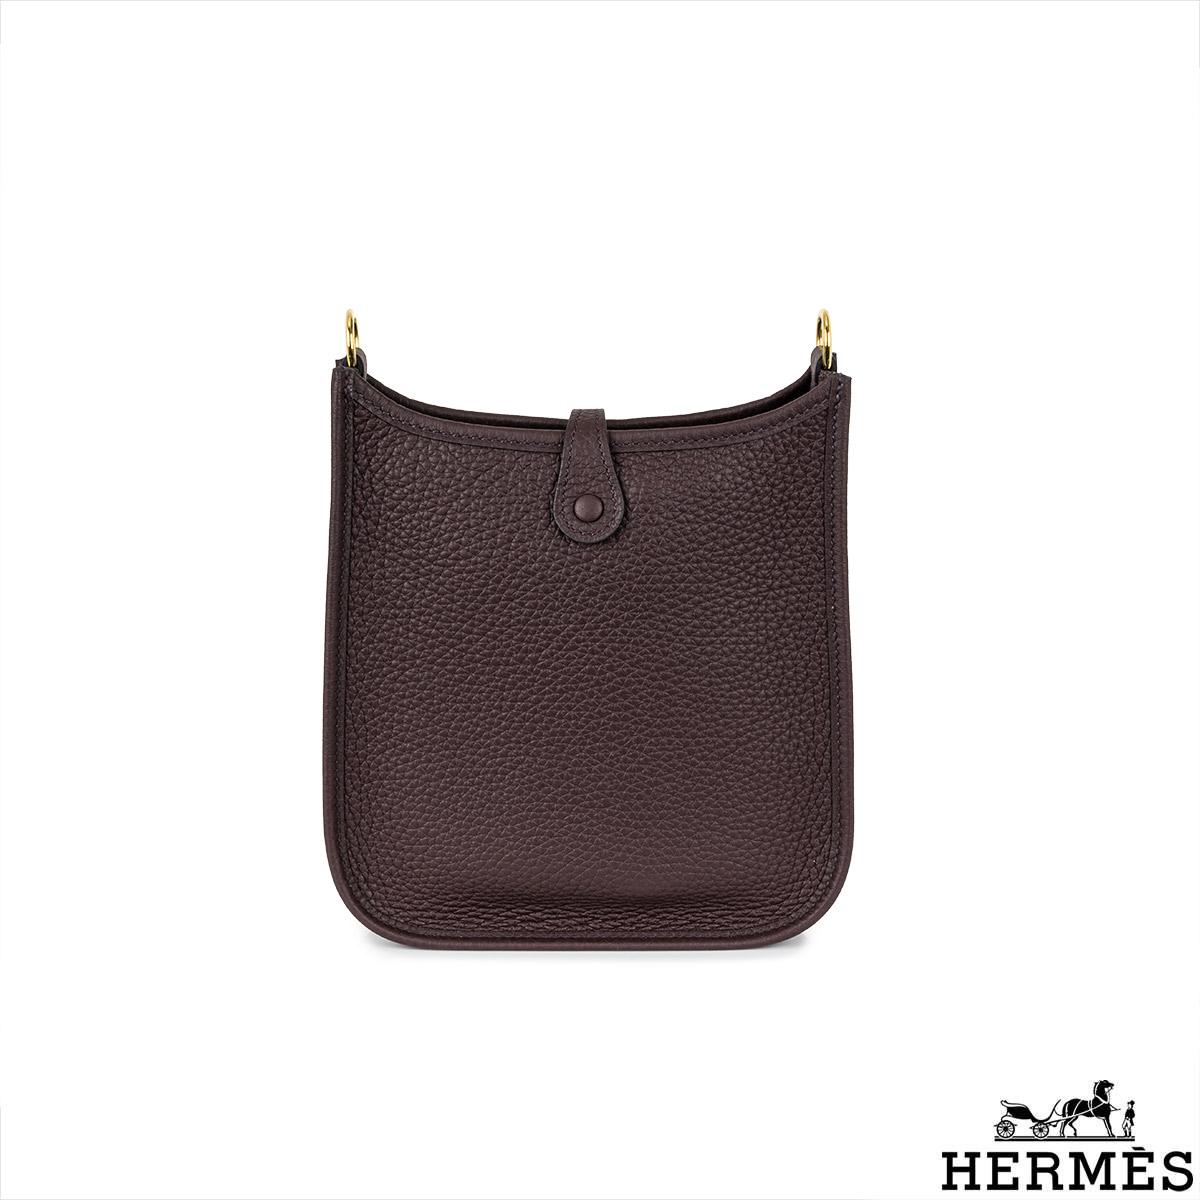 A lovely Hermès mini Evelyne handbag. The exterior of this Evelyne bag is crafted from chocolate Clemence leather complemented with gold-tone hardware and tonal stitching. It features a perforated 